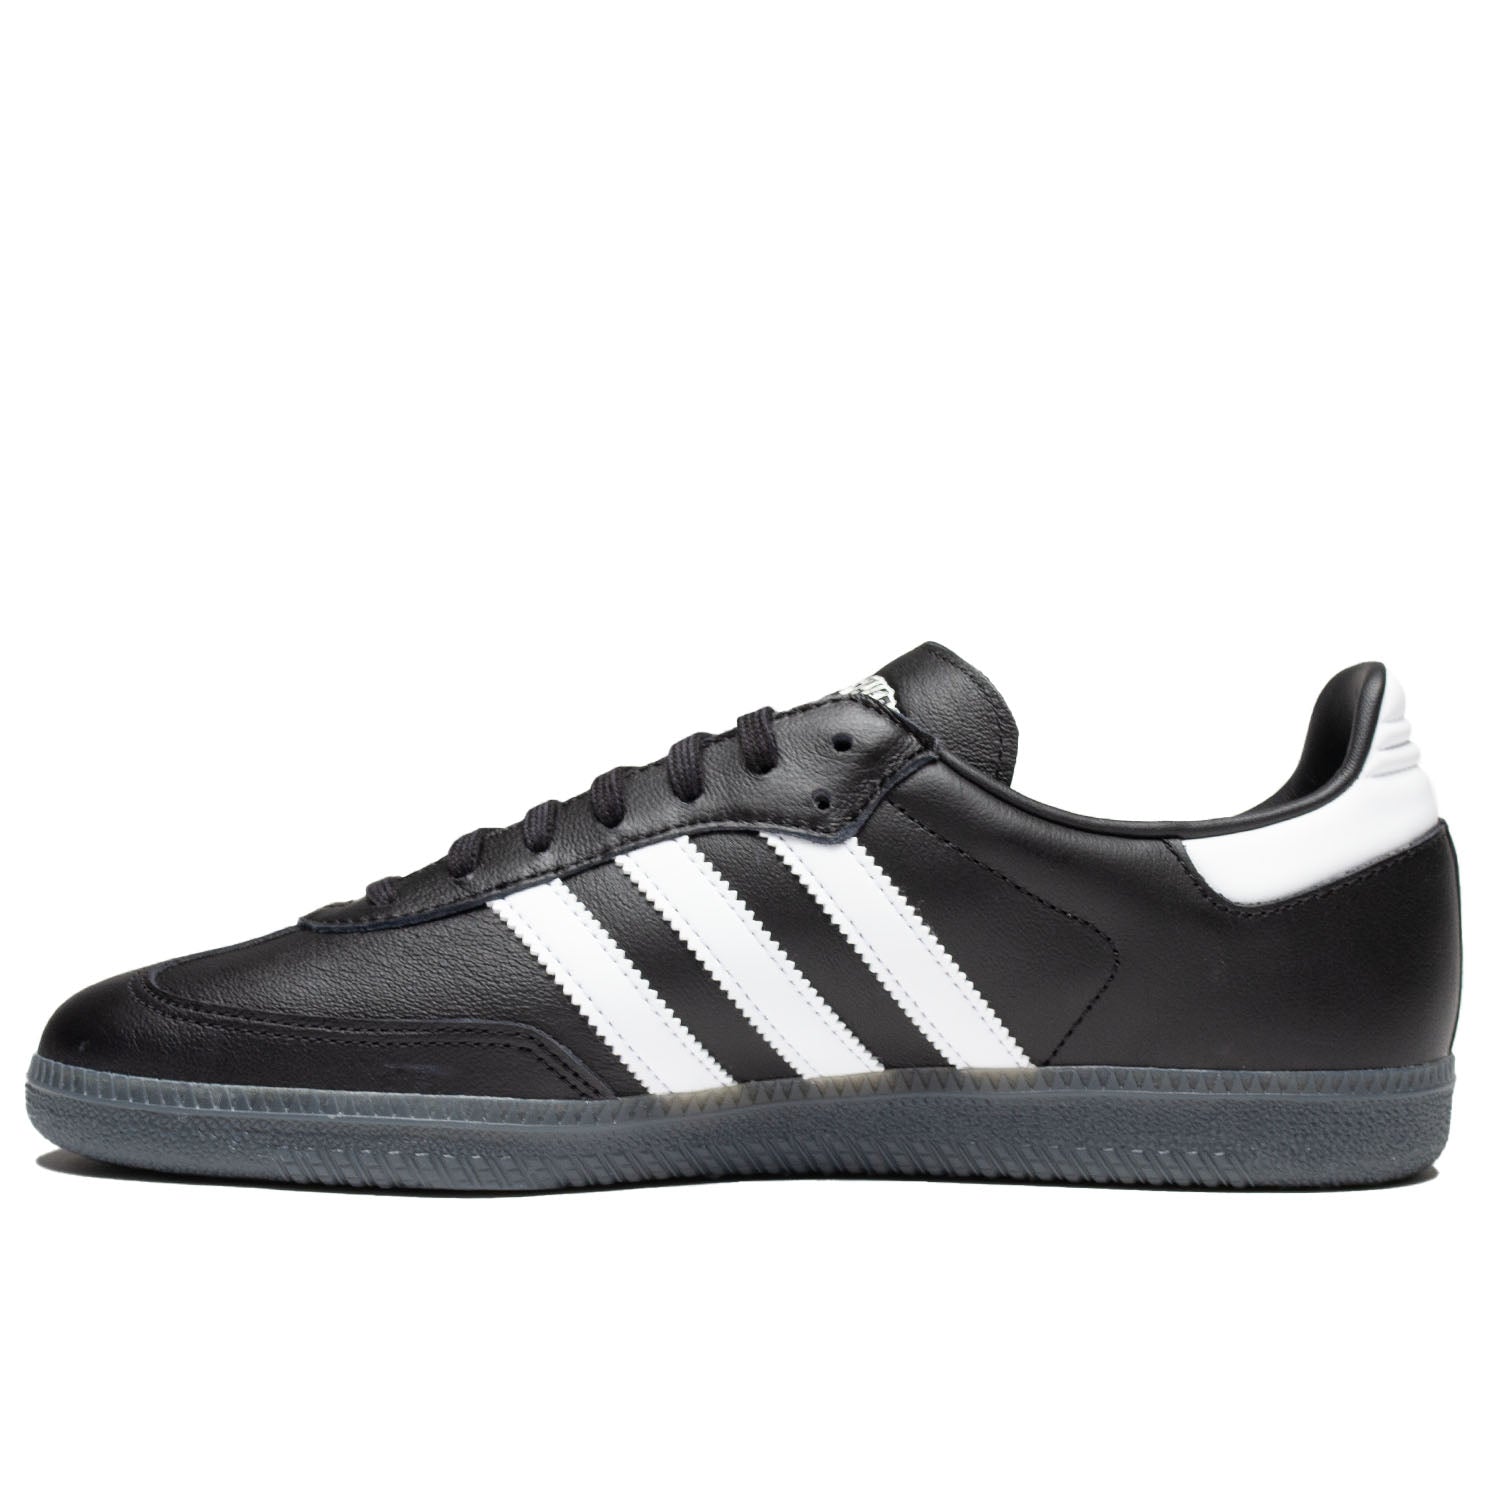 Adidas and Fucking Awesome Samba in black leather with white leather stripes and clear sole.